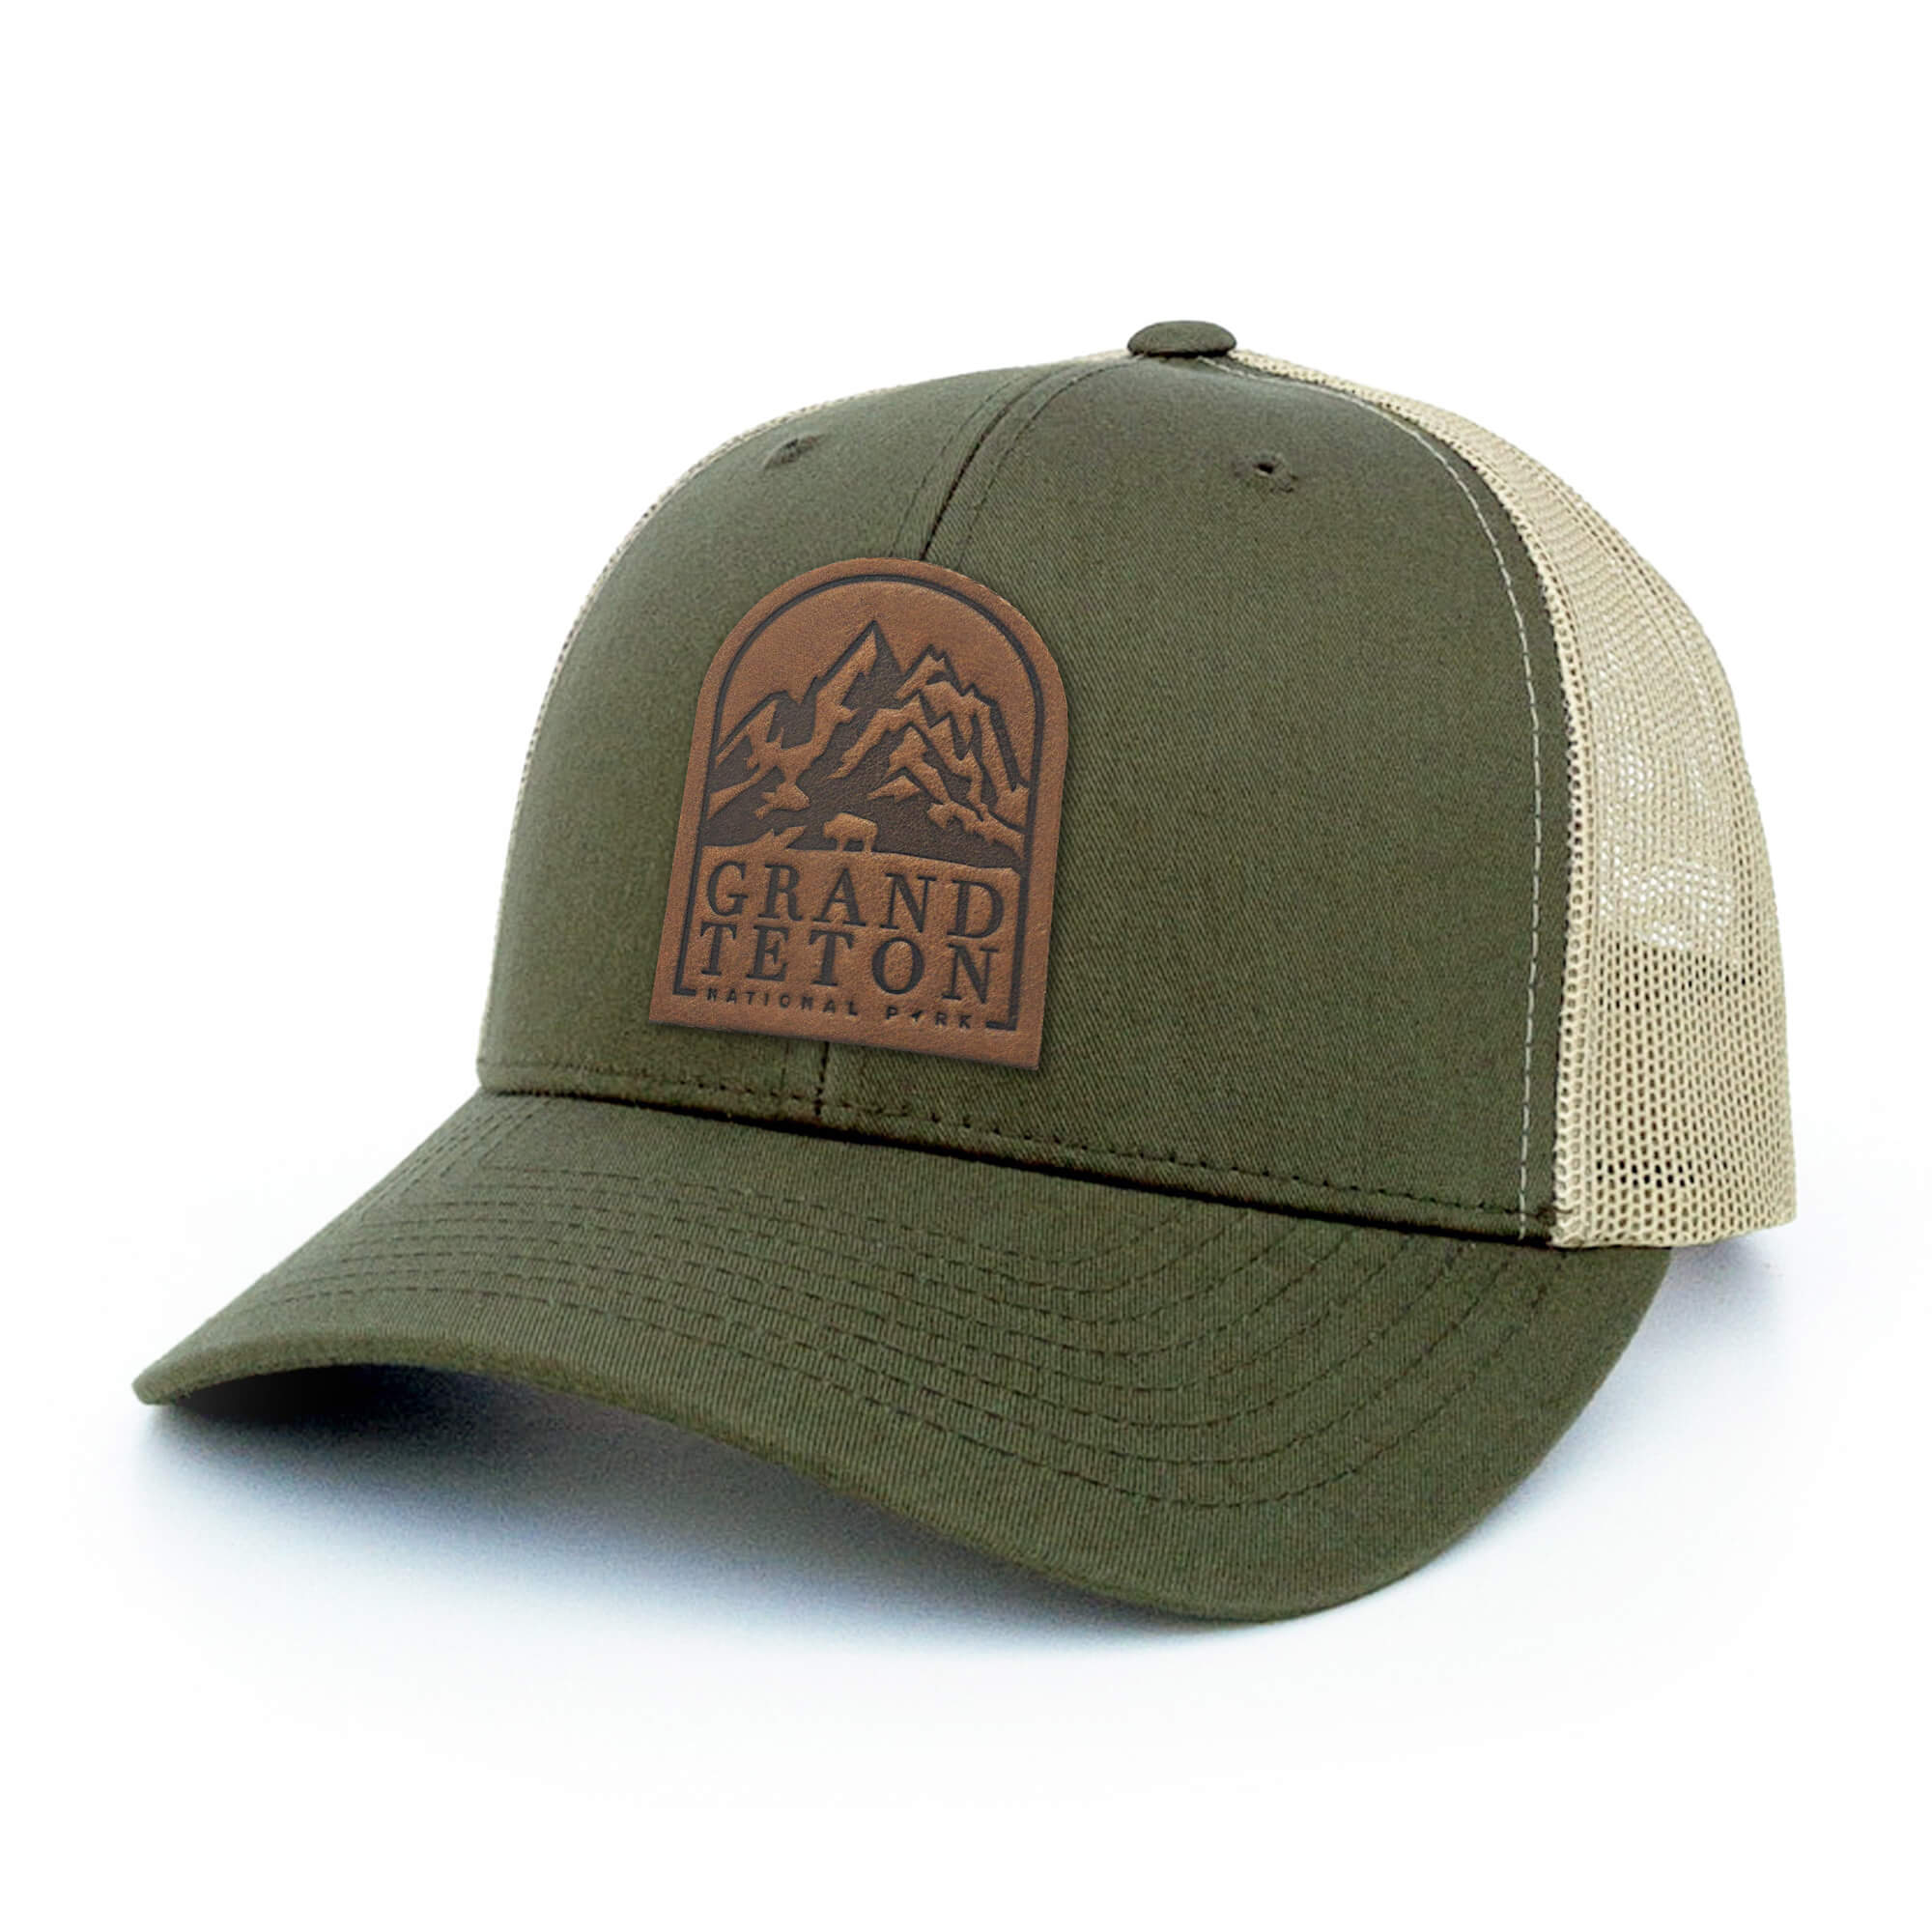 Moss green and khaki trucker hat with full-grain leather patch of Grand Teton National Park | BLACK-007-003, CHARC-007-003, NAVY-007-003, HGREY-007-003, MOSS-007-003, BROWN-007-003